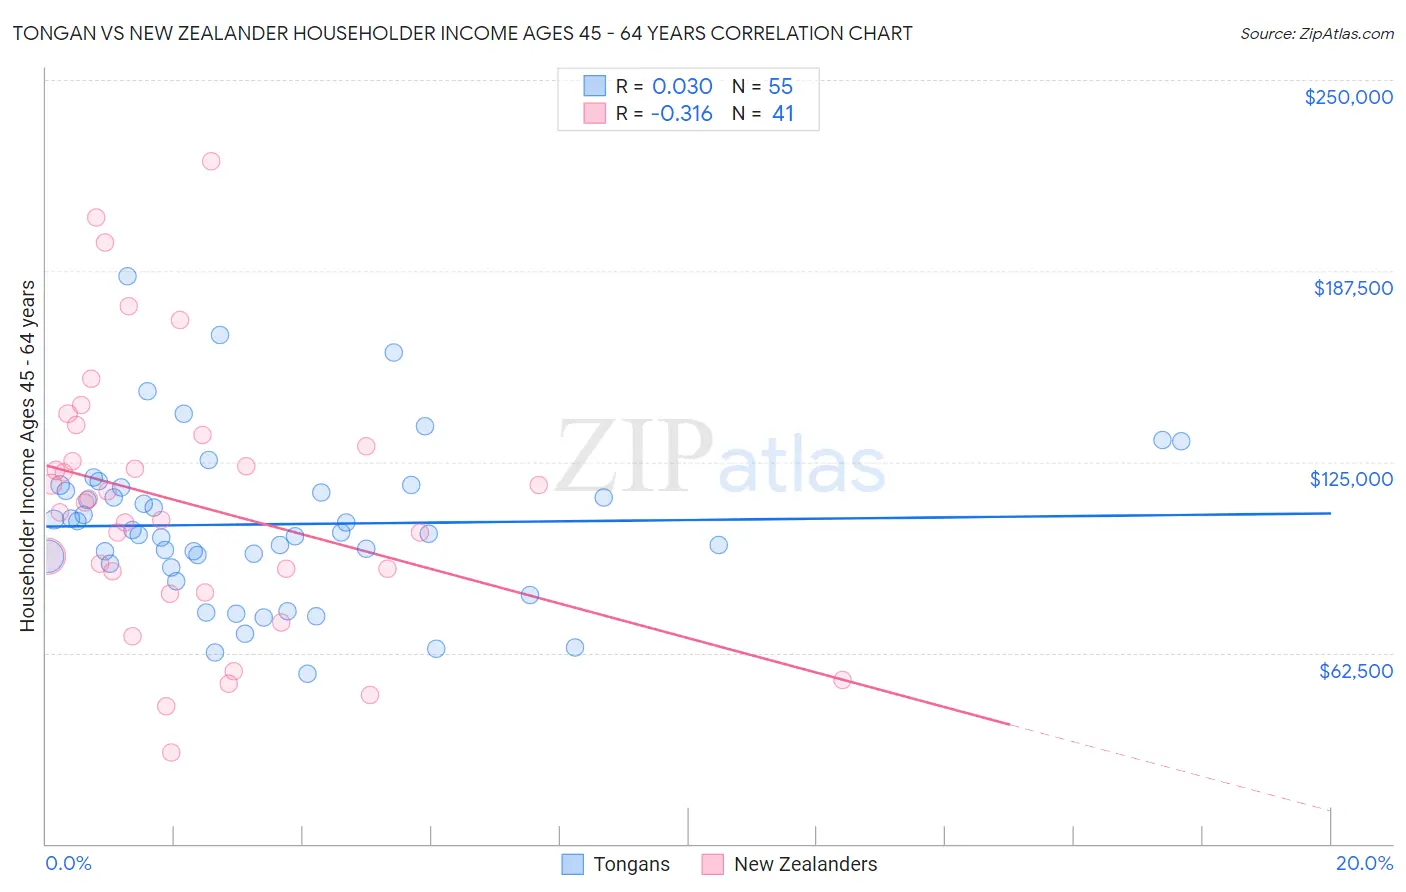 Tongan vs New Zealander Householder Income Ages 45 - 64 years